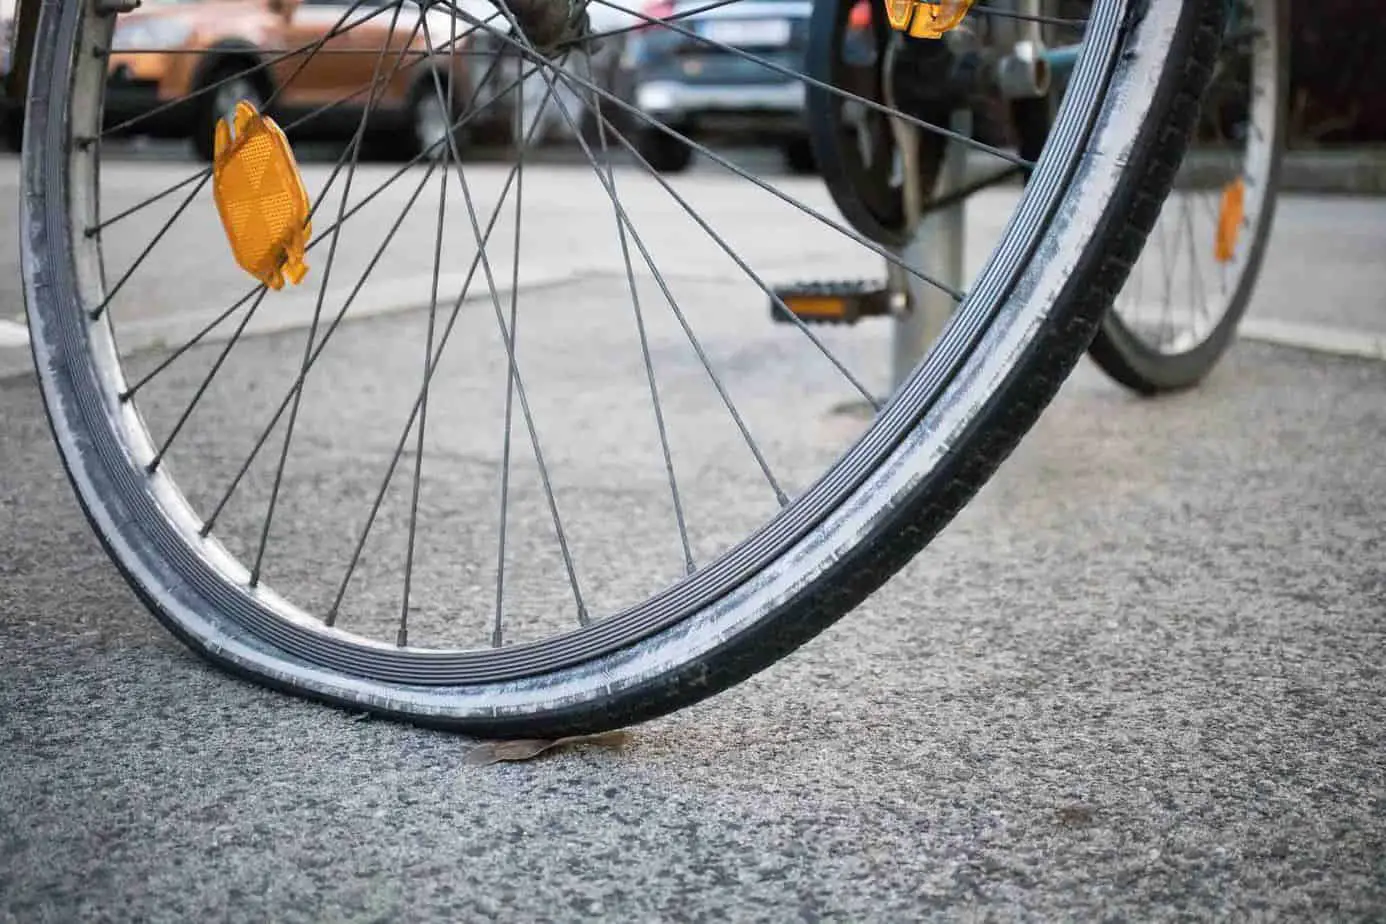 How to Prevent Punctures on Your Road Bike Tires 5 - How to Prevent Punctures on Your Road-Bike Tires